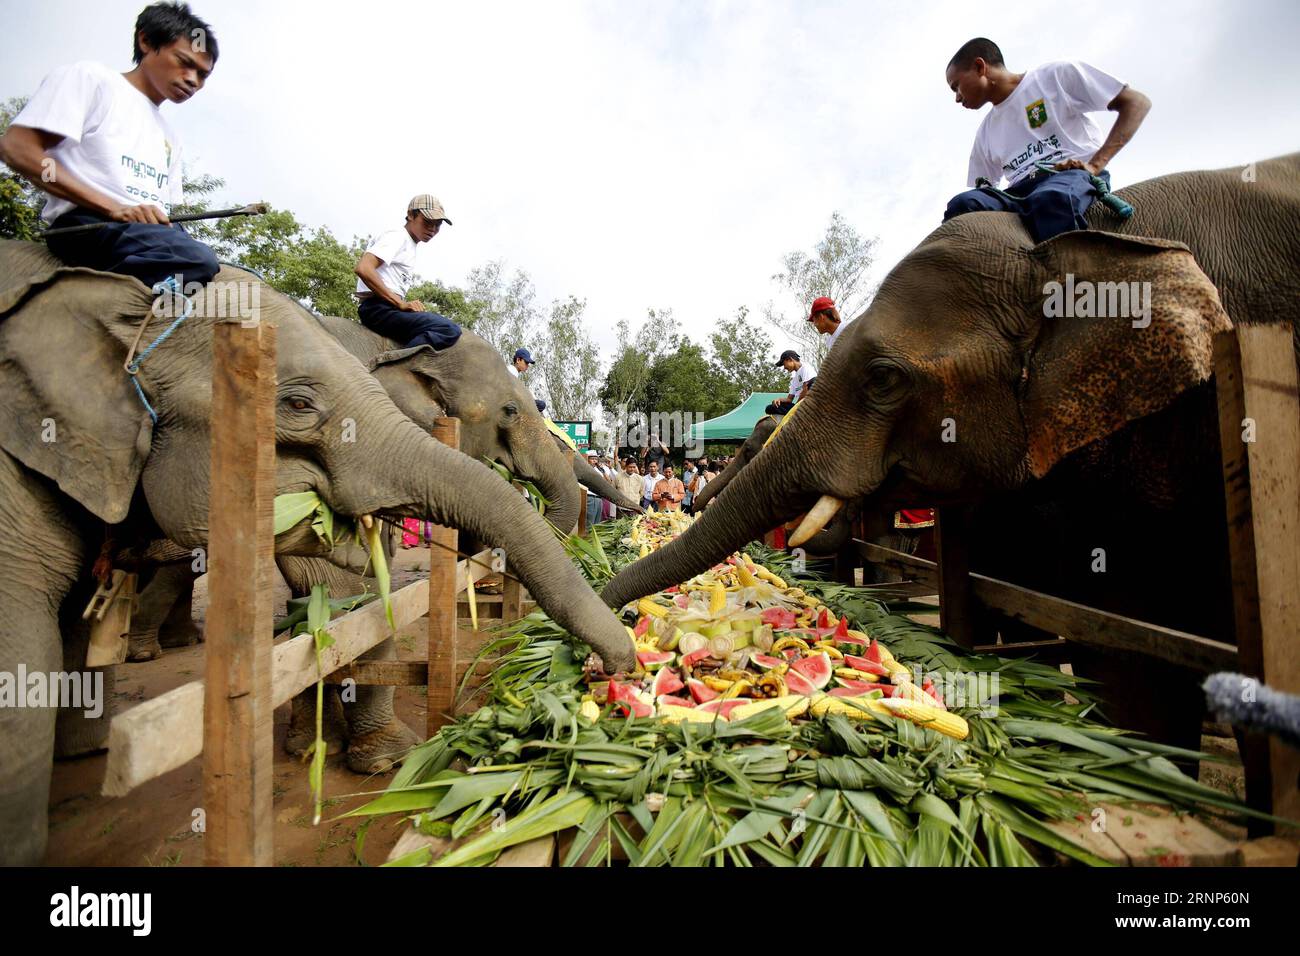 (170812) -- BAGO, Aug. 12, 2017 -- Elephant keepers feed elephants with various kinds of fruits and vegetables at the Wingabaw Elephant Resort Camp on World Elephant Day in Bago Region, Myanmar, Aug. 12, 2017. The World Elephant Day was launched on Aug. 12, 2012 to bring attention to the urgent plight of Asian and African elephants. ) (zxj) MYANMAR-BAGO-WORLD ELEPHANT DAY UxAung PUBLICATIONxNOTxINxCHN   Bago Aug 12 2017 Elephant Keepers Feed Elephants With Various Kinds of Fruits and Vegetables AT The  Elephant Resort Camp ON World Elephant Day in Bago Region Myanmar Aug 12 2017 The World Elep Stock Photo